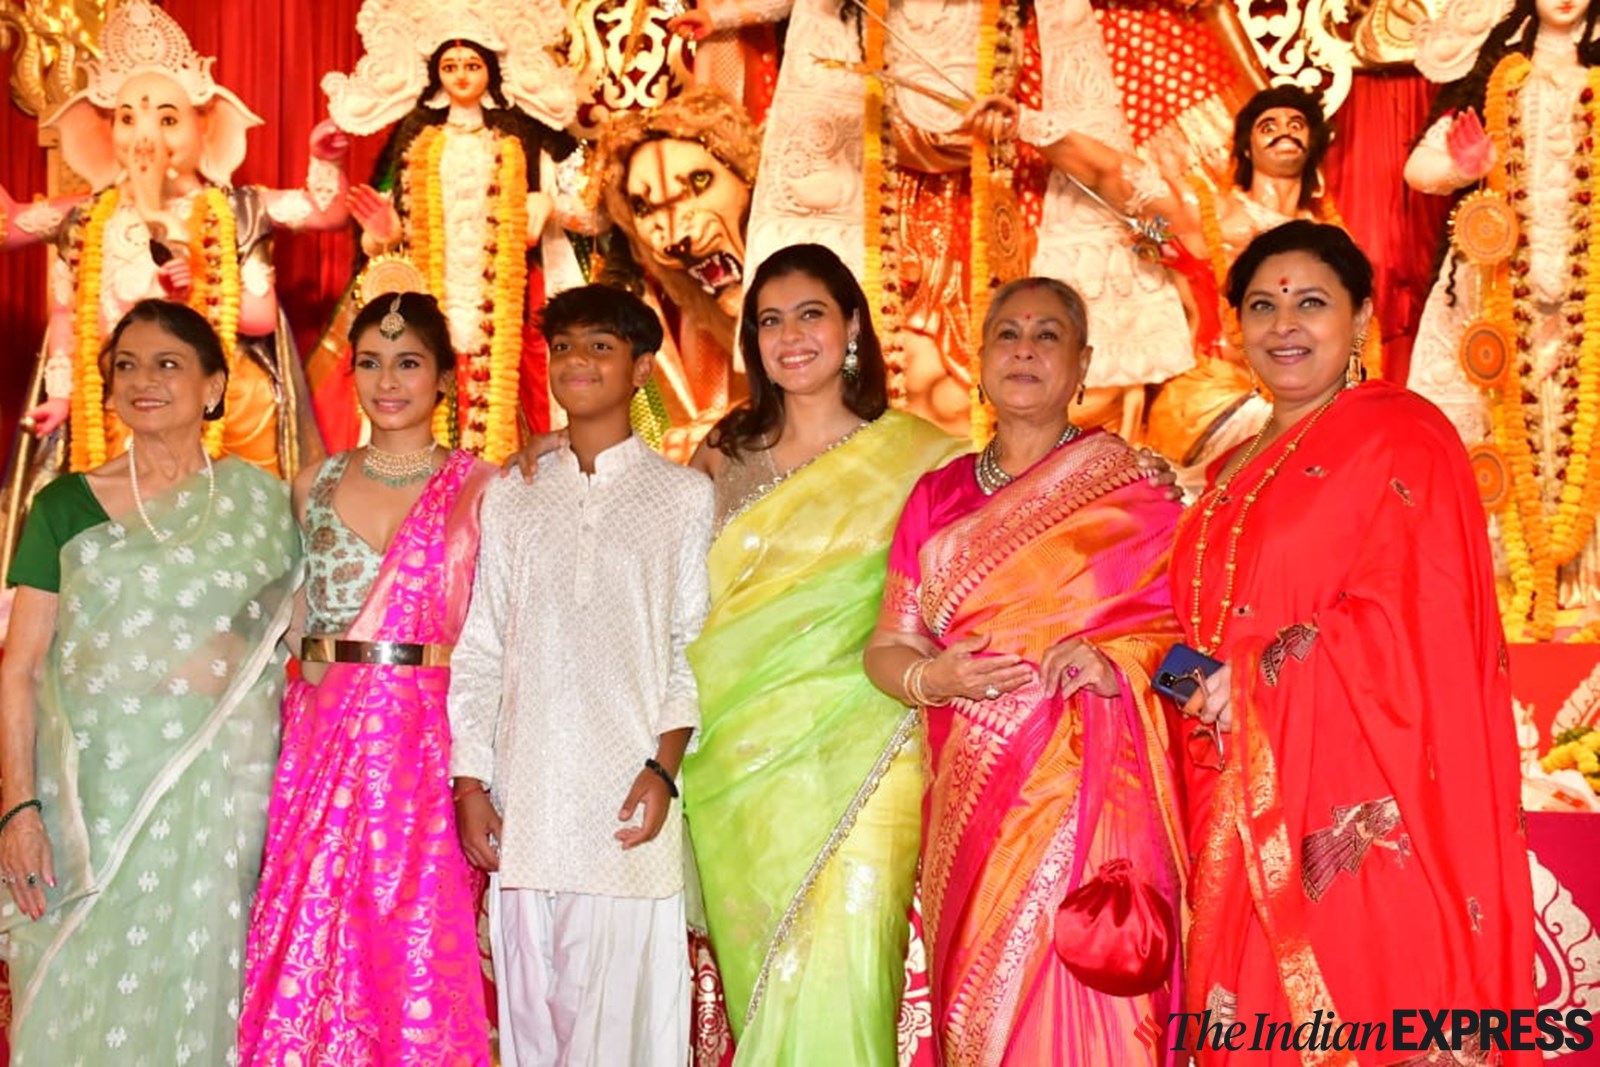 Image of Indian Women in traditional attire during Durga Puja-JP321521-Picxy